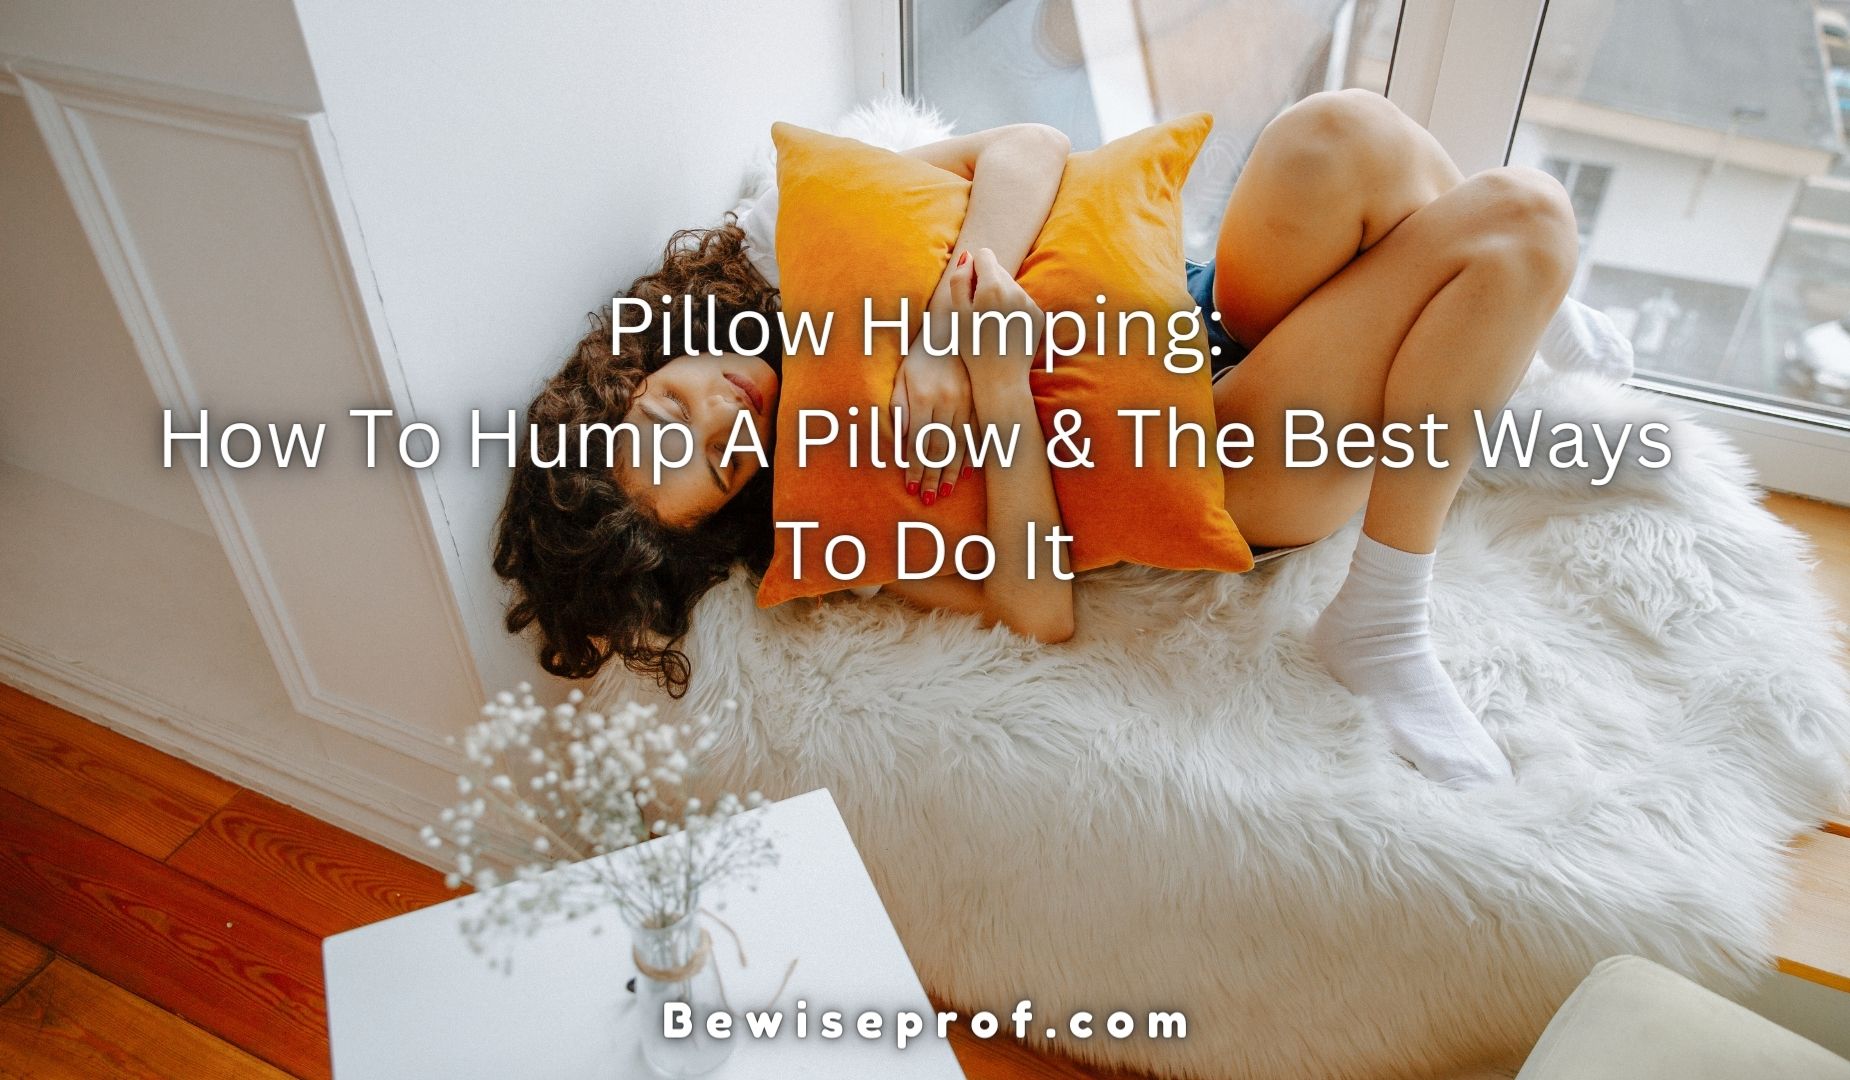 Pillow humping how to